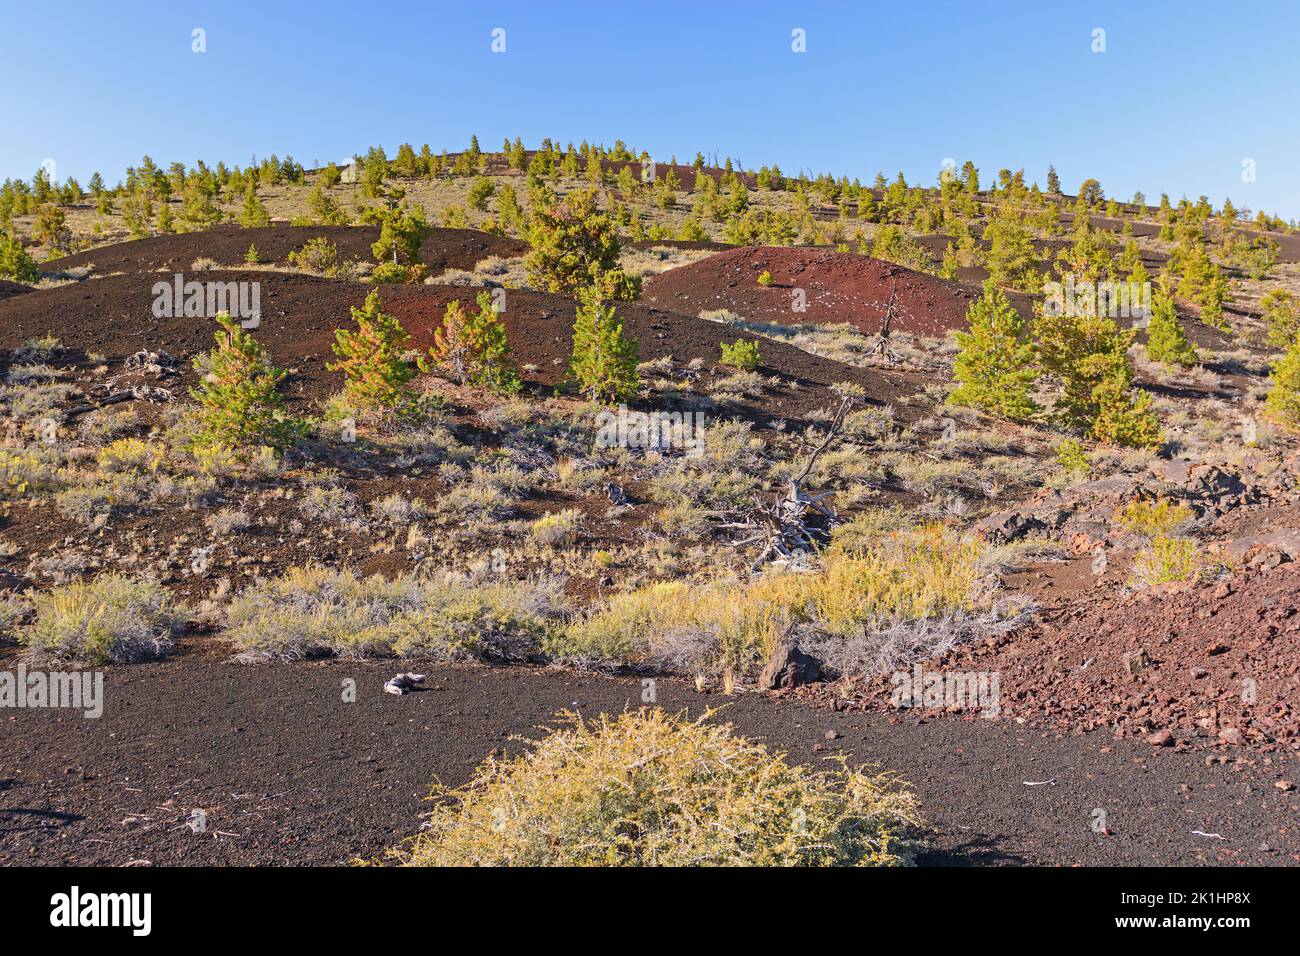 Vegetation Slowly Overgrowing a Volcanic Landscape in Craters of the Moon National Monument in Idaho Stock Photo